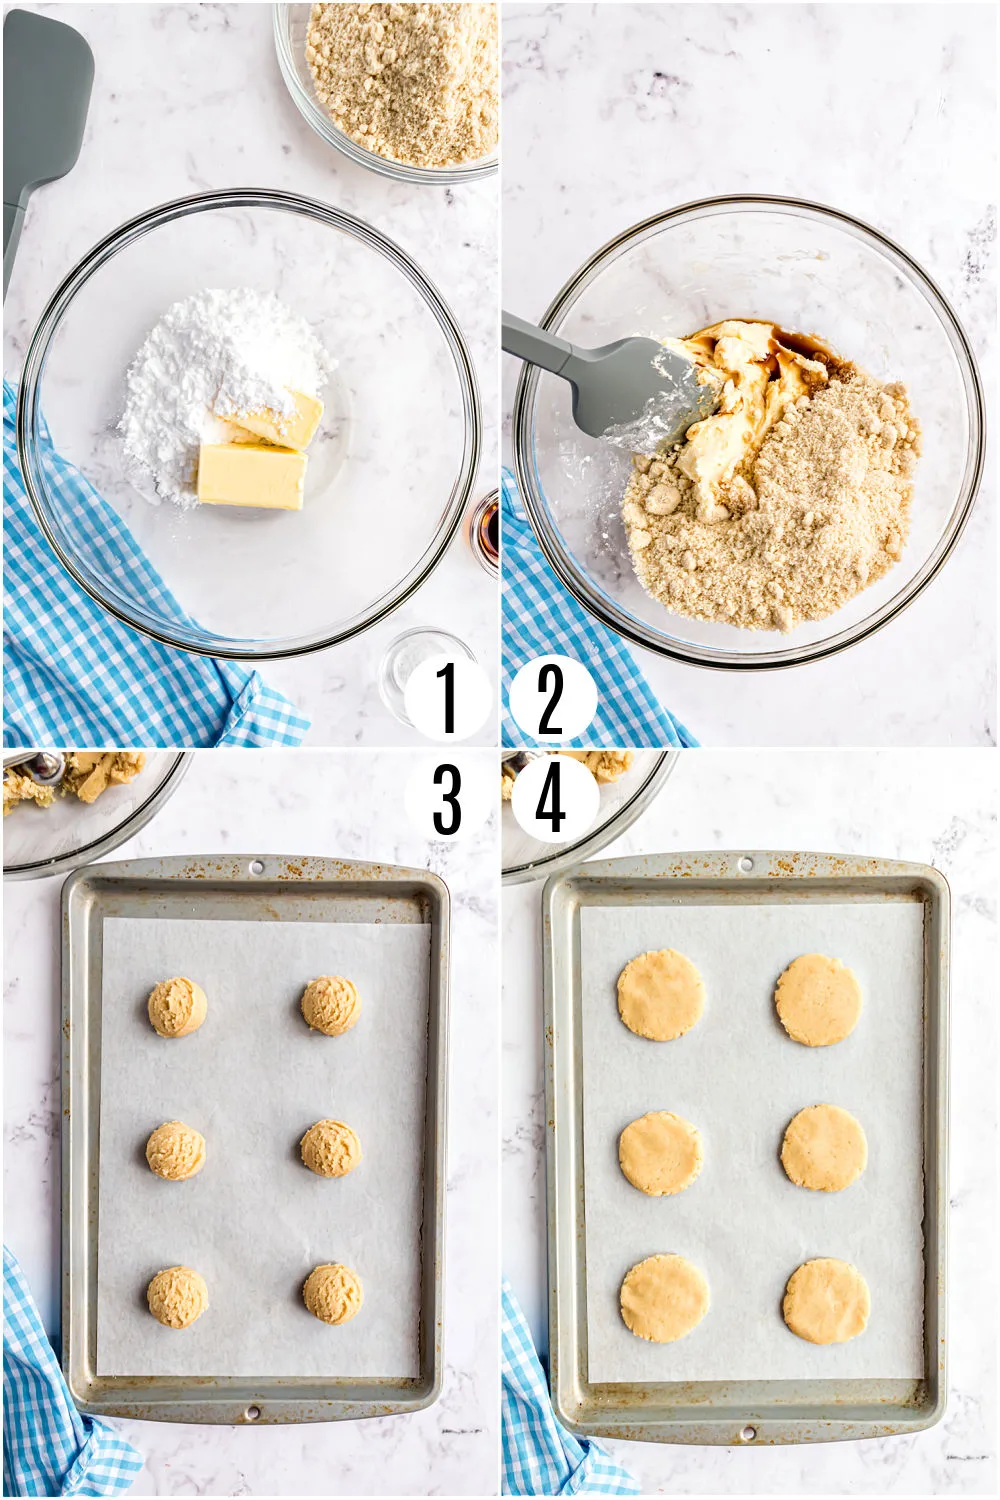 Step by step photos showing how to make shortbread cookies sugar free.